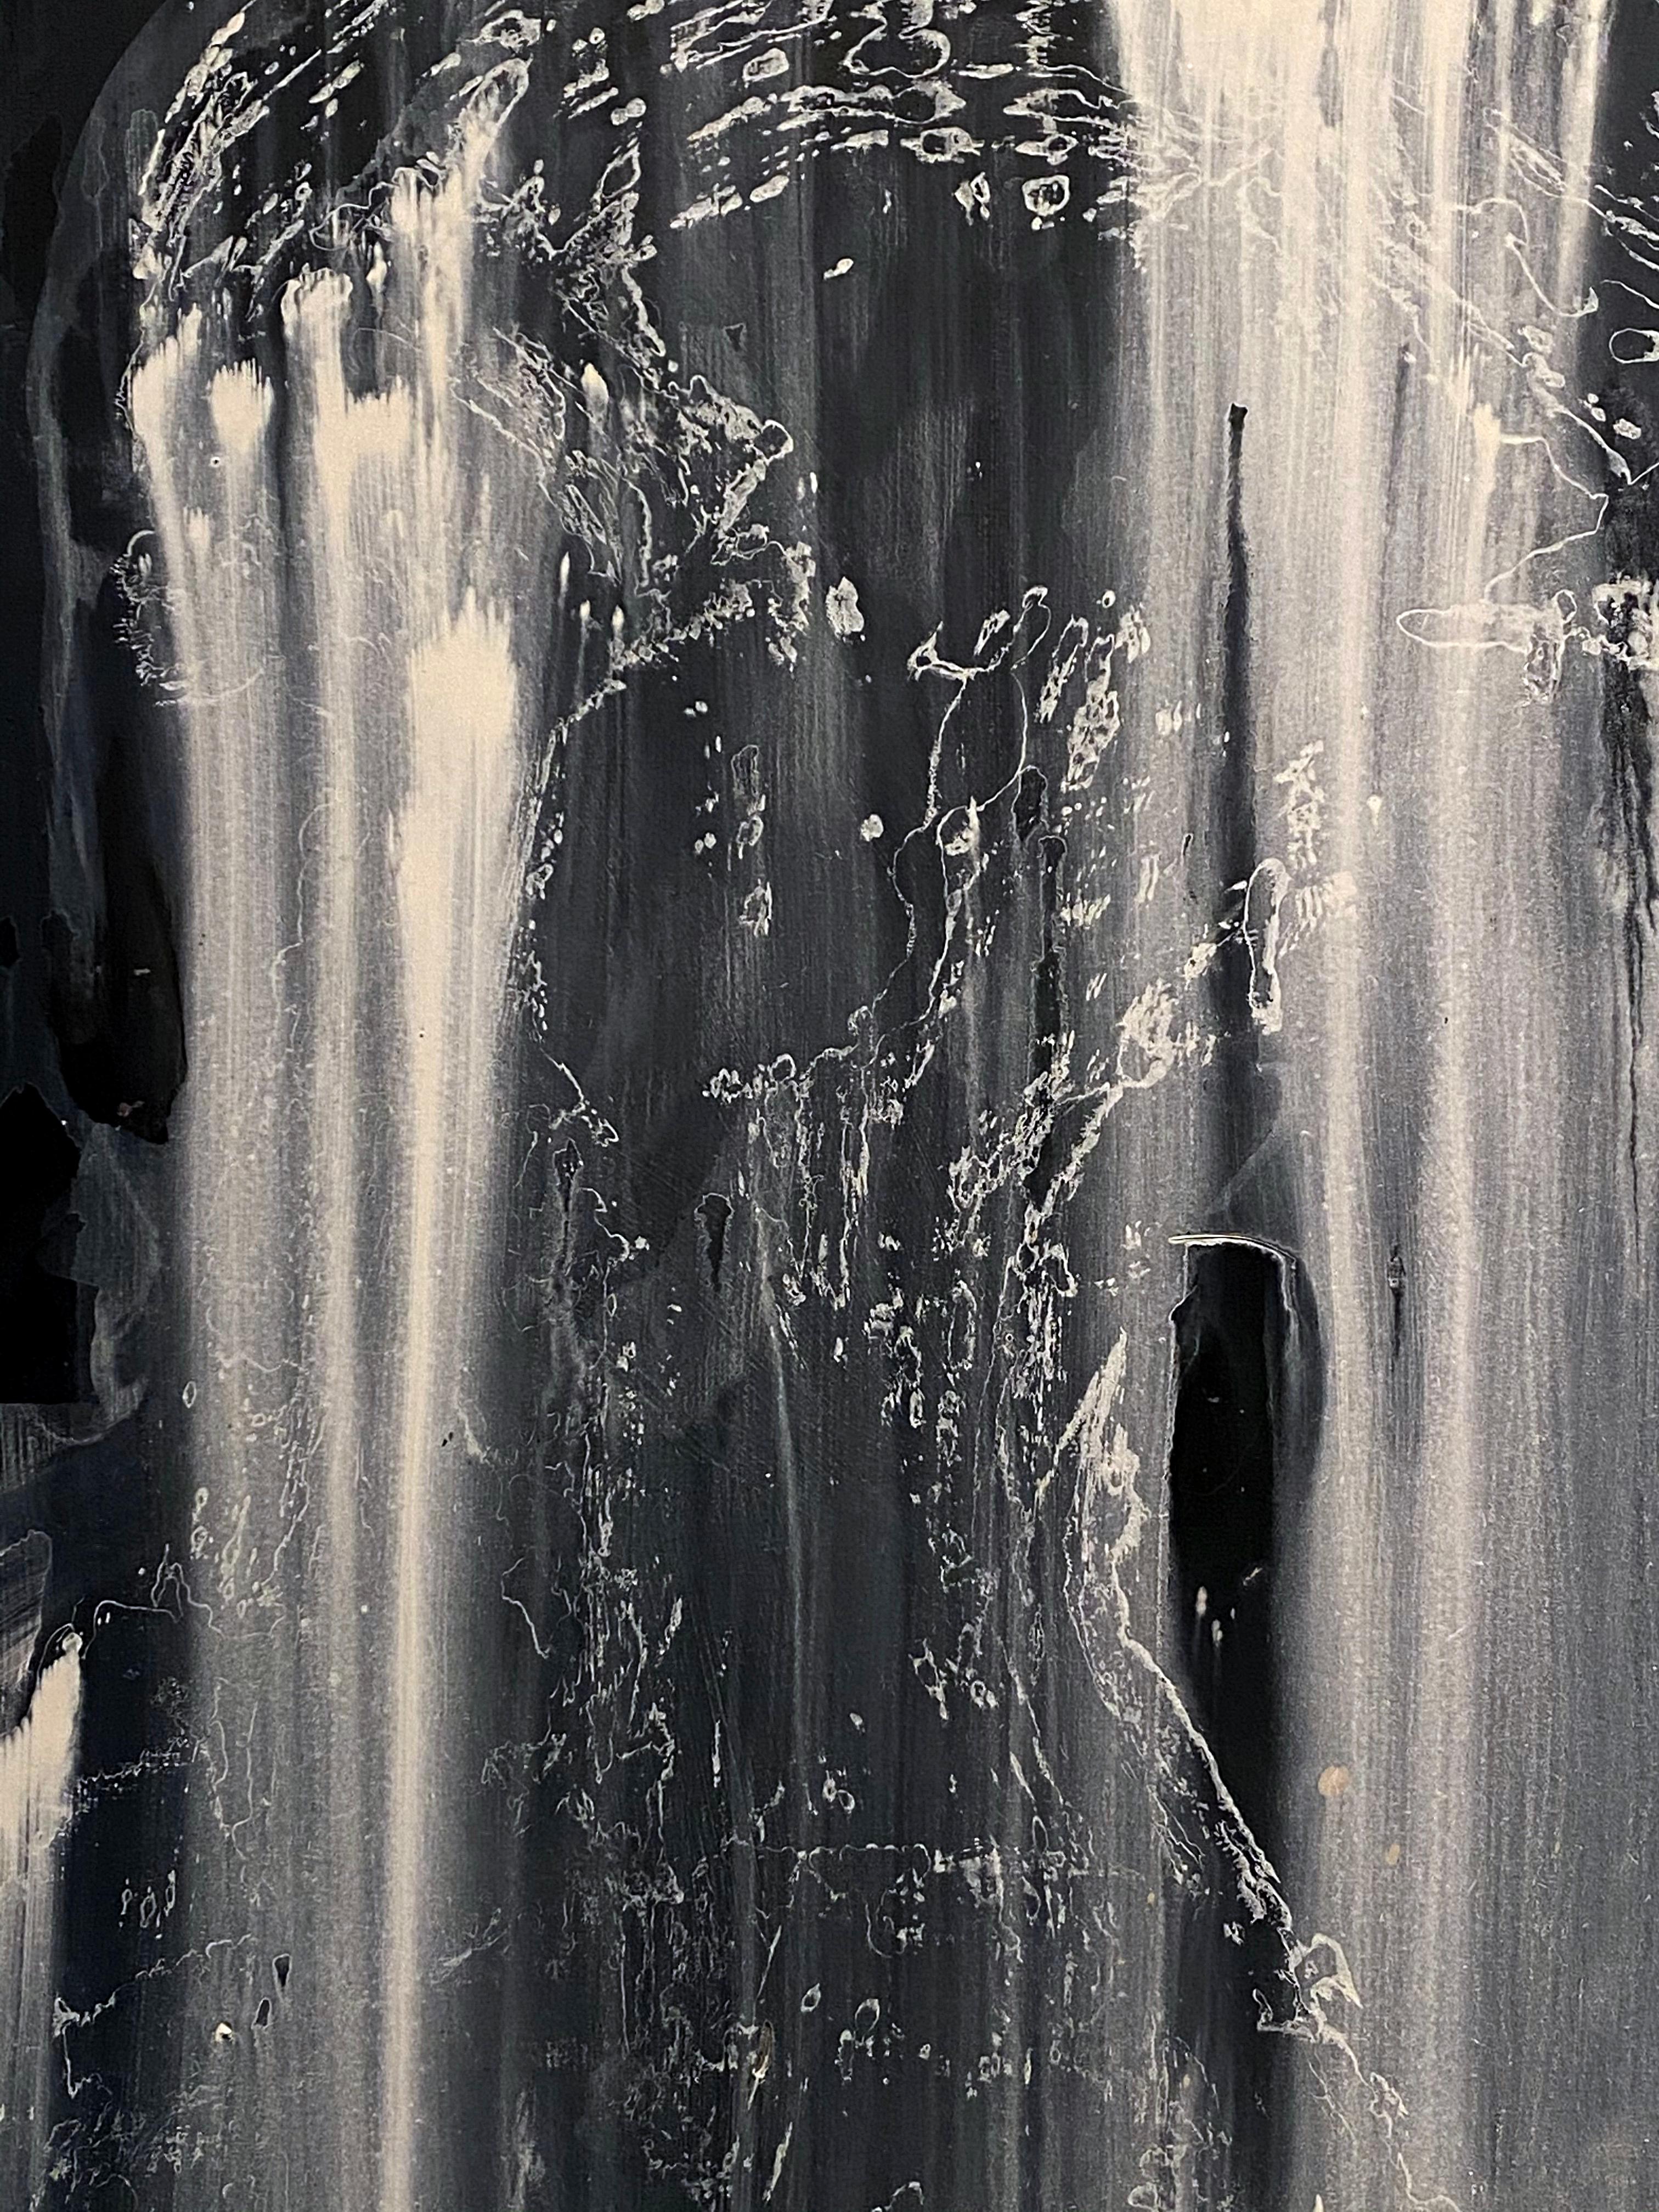 DELUGE
2018

Contrasting white drips pour against a stark black backdrop in this contemporary, abstract painting on masonite. 

On the back, Artist’s signature and MMXVIII indicates the year work was done (2018). 

Masonite is solid and unframed.